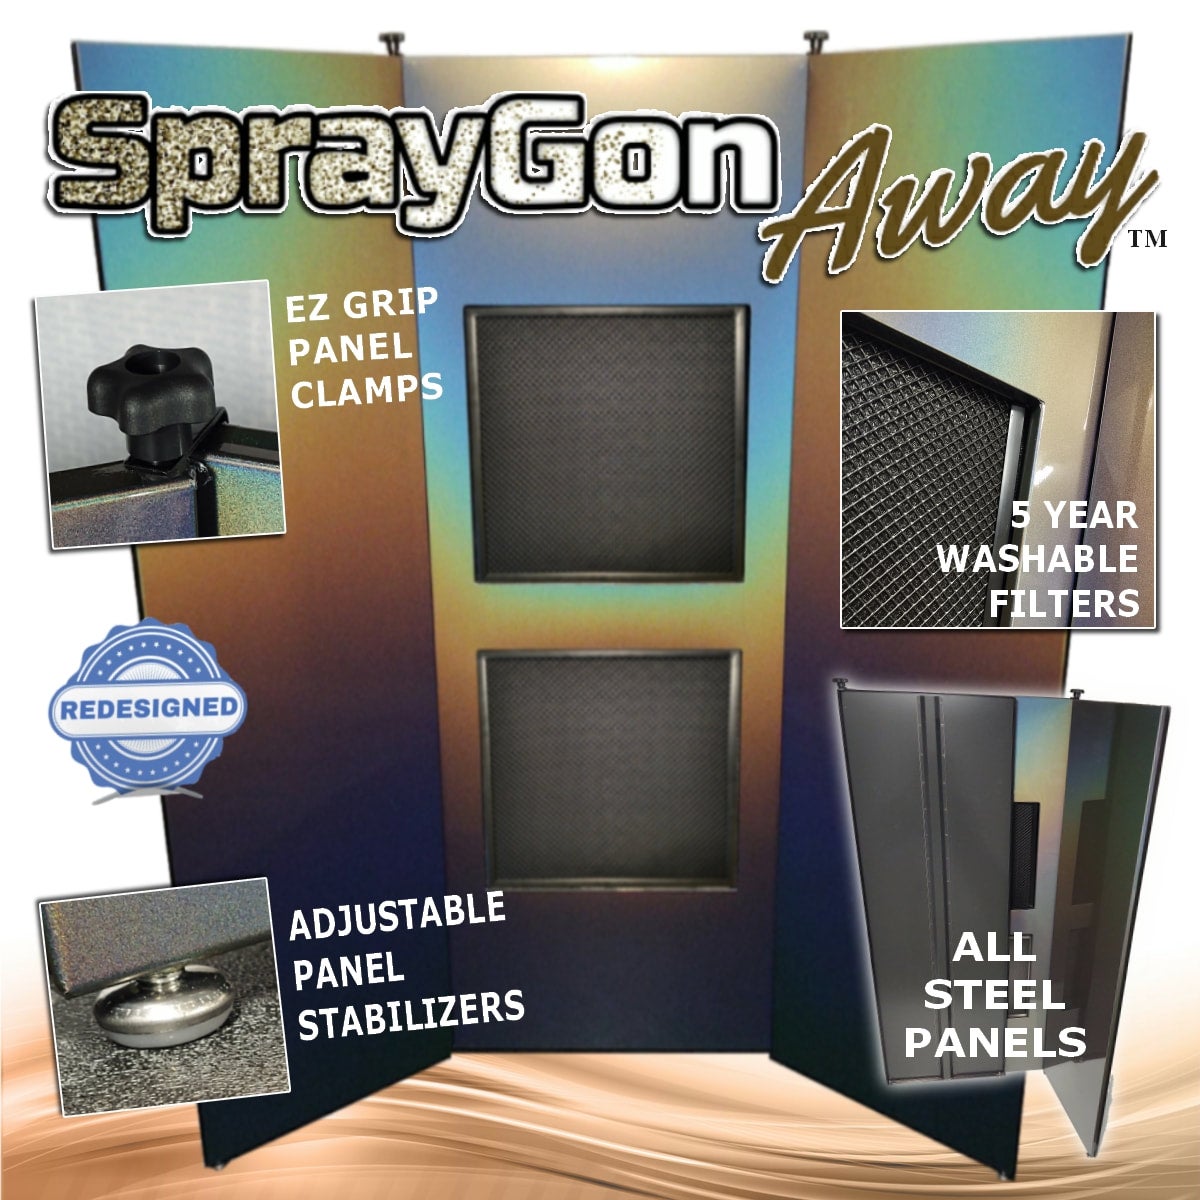 SprayGon Extraction Systems